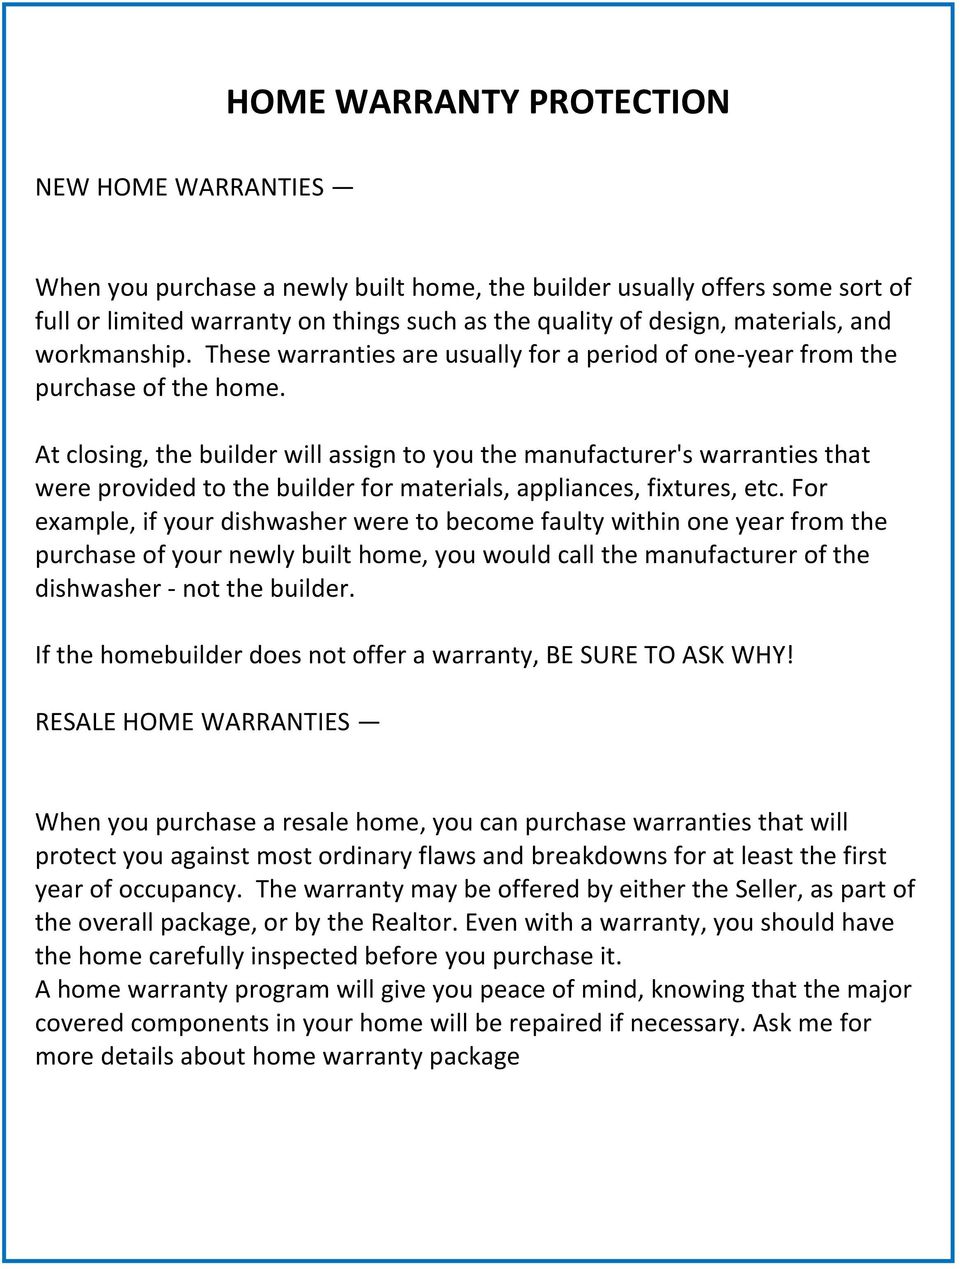 At closing, the builder will assign to you the manufacturer's warranties that were provided to the builder for materials, appliances, fixtures, etc.